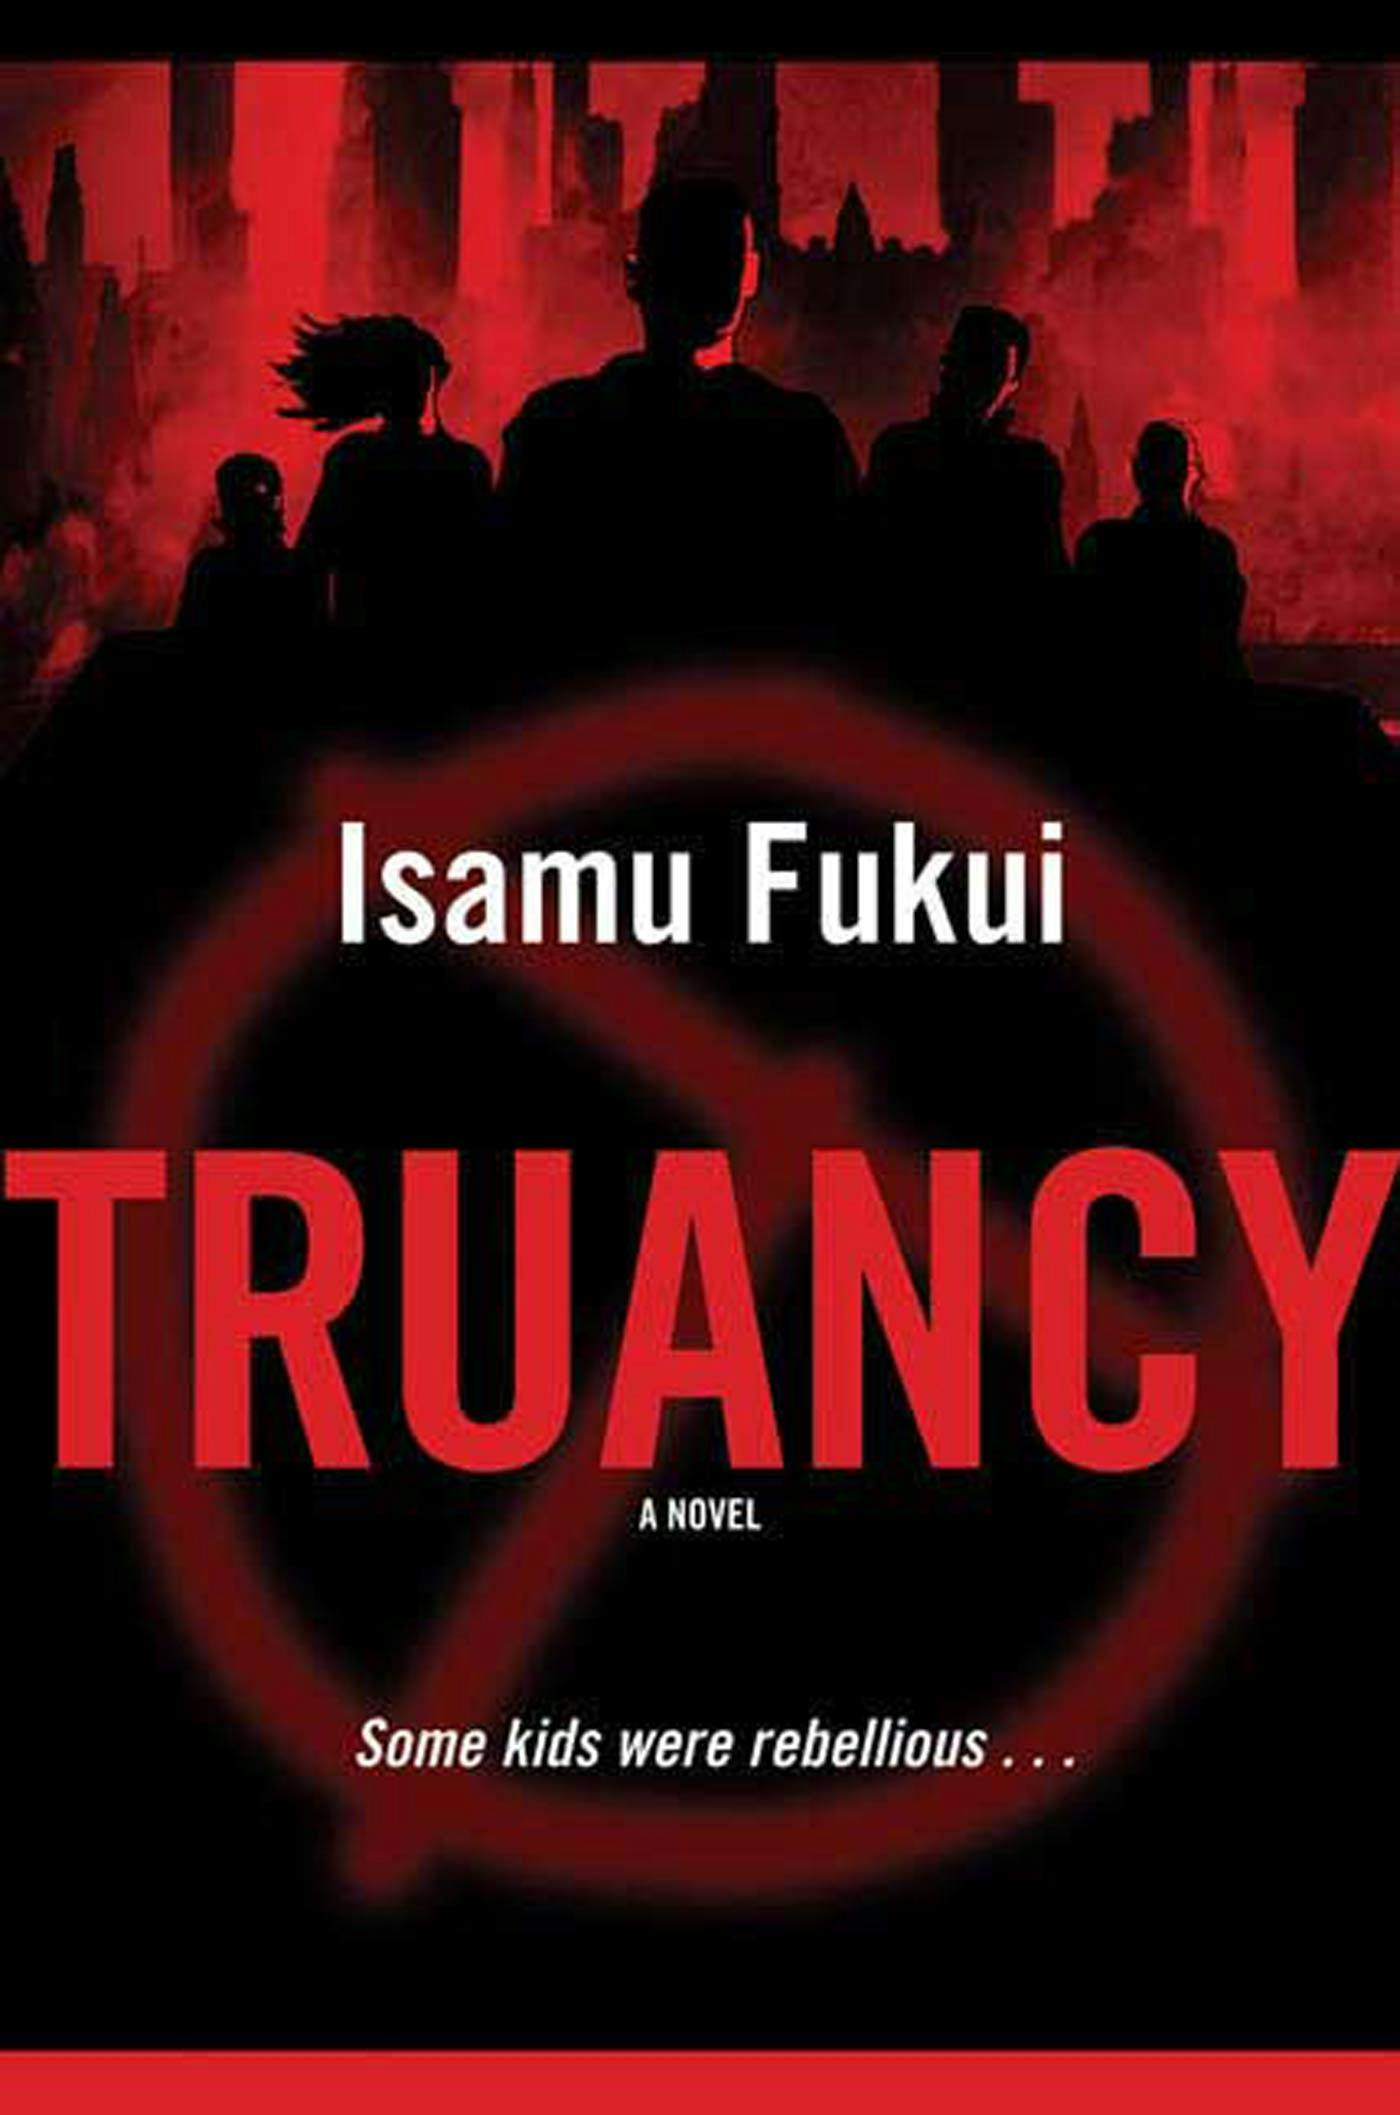 Cover for the book titled as: Truancy